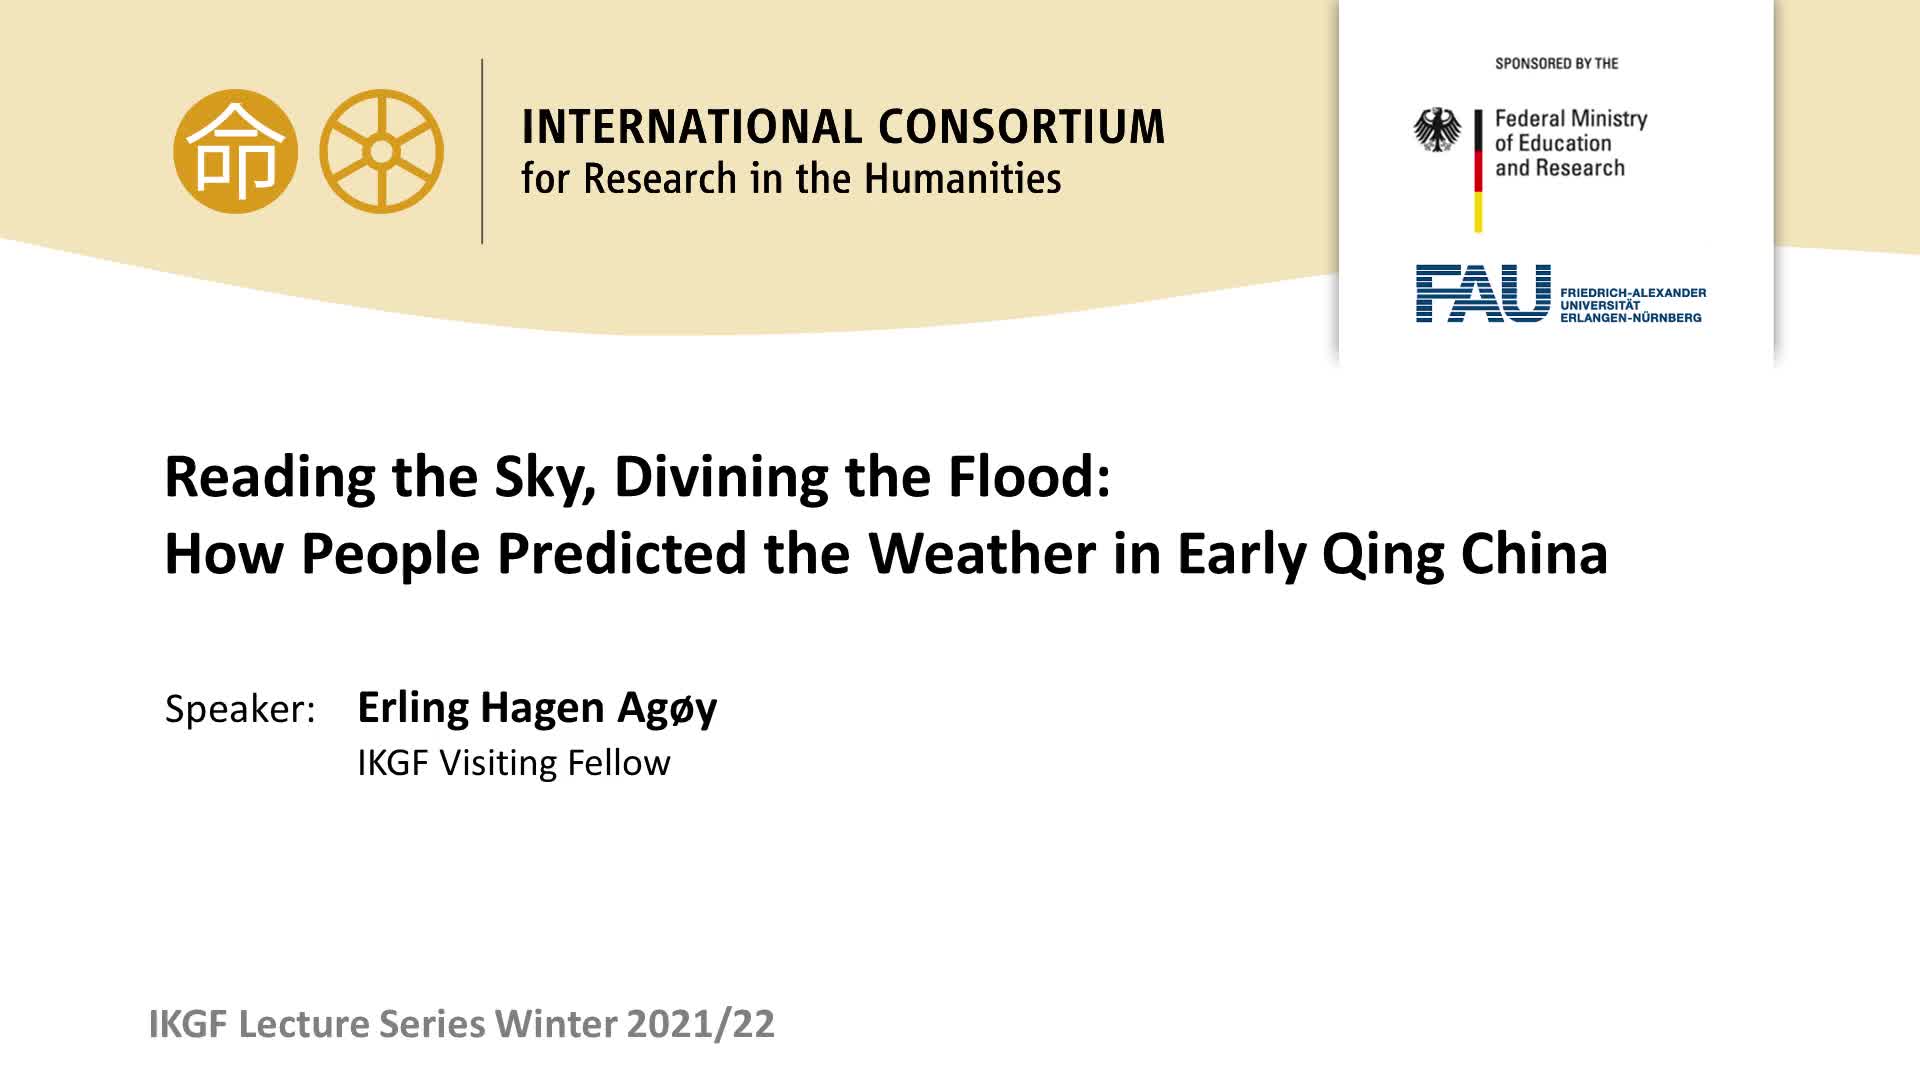 Reading the Sky, Divining the Flood: How People Predicted the Weather in Early Qing China preview image